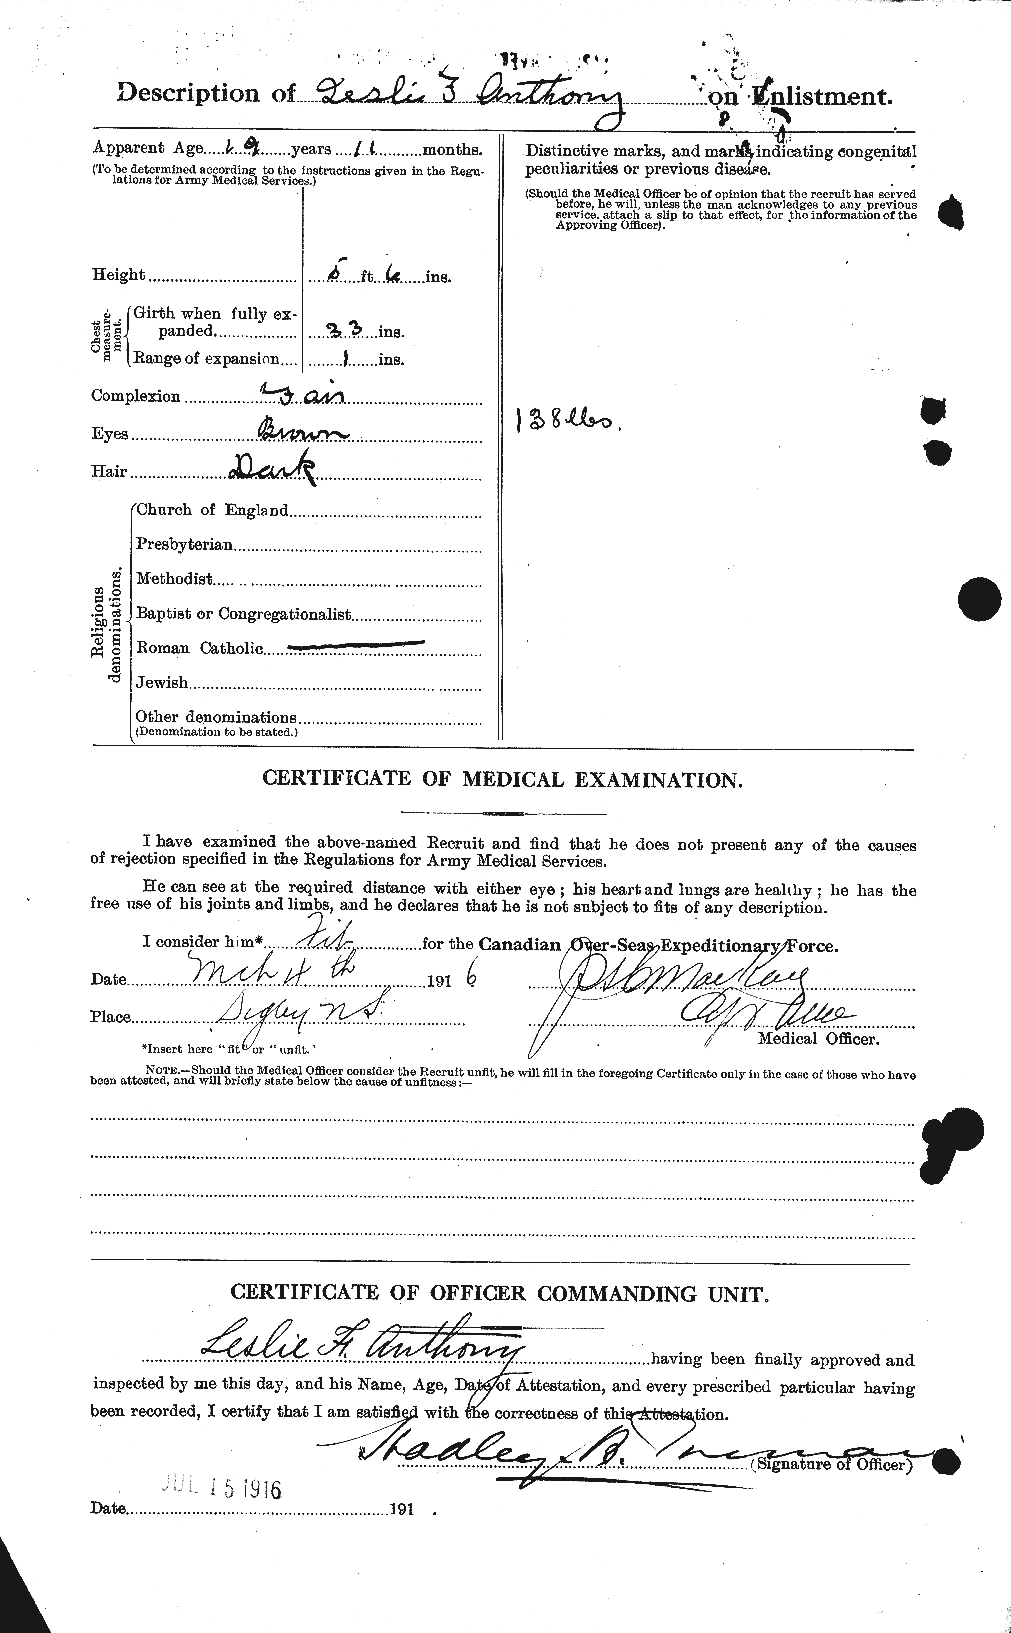 Personnel Records of the First World War - CEF 212188b